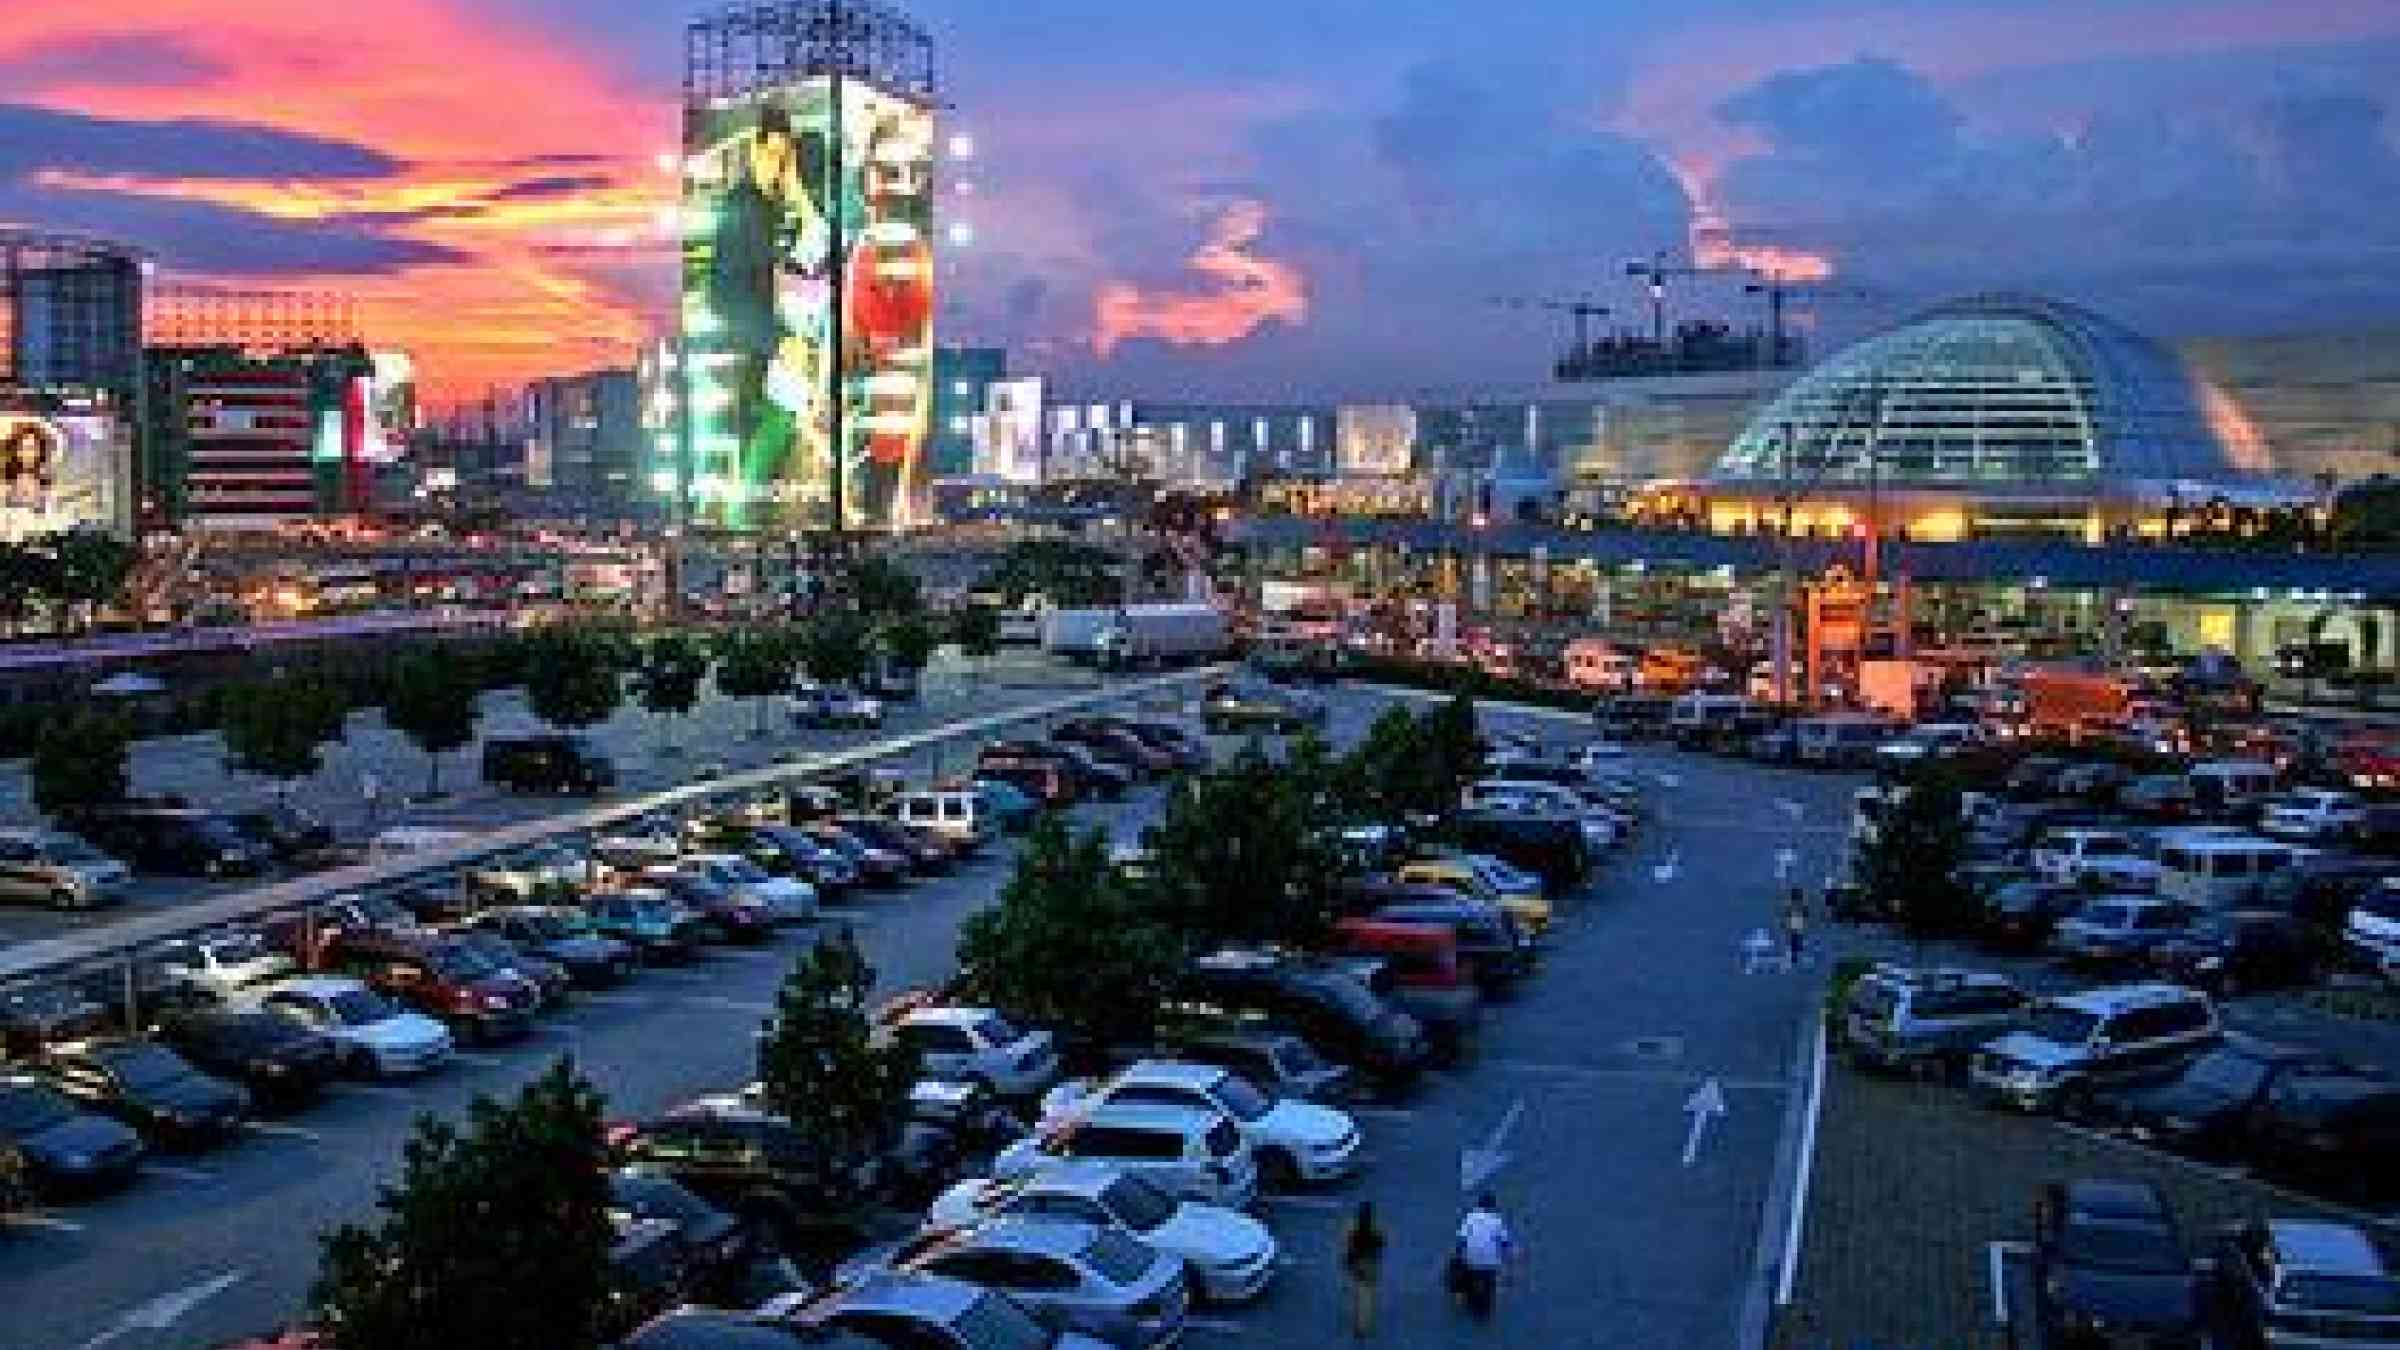 One of the largest malls in the Philippines, SM City North EDSA, is located in Quezon City. In 2011, the city held five consultative workshops with a variety of stakeholders on the Local Government Self-Assessment Tool to assess urban risk.